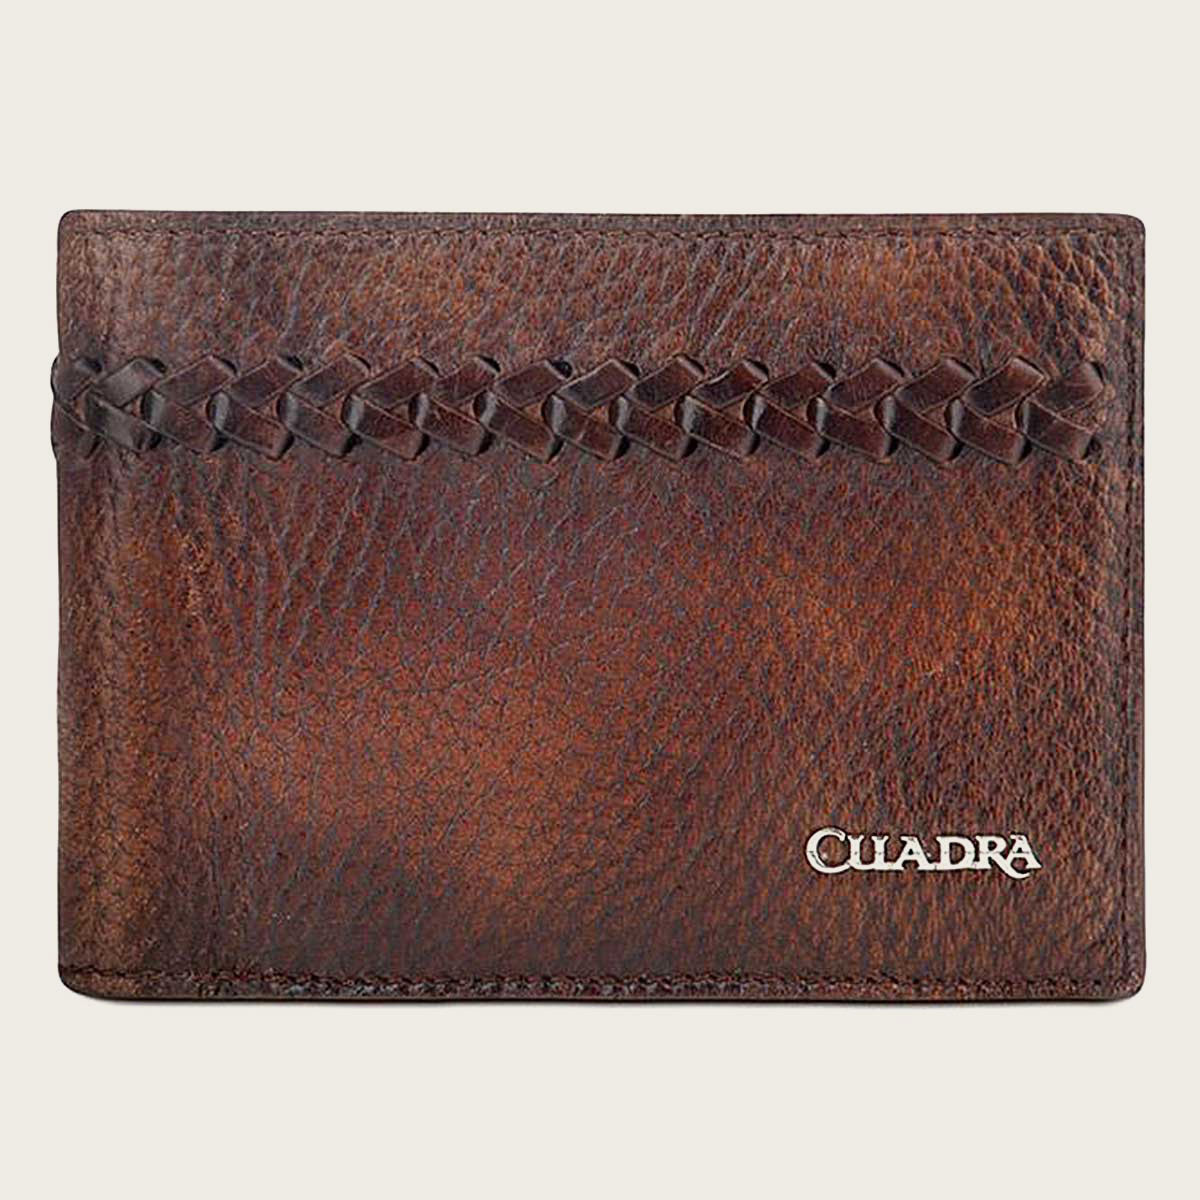 Men's wallet in genuine deer leather. Design with an interwoven handcrafted detail on the front